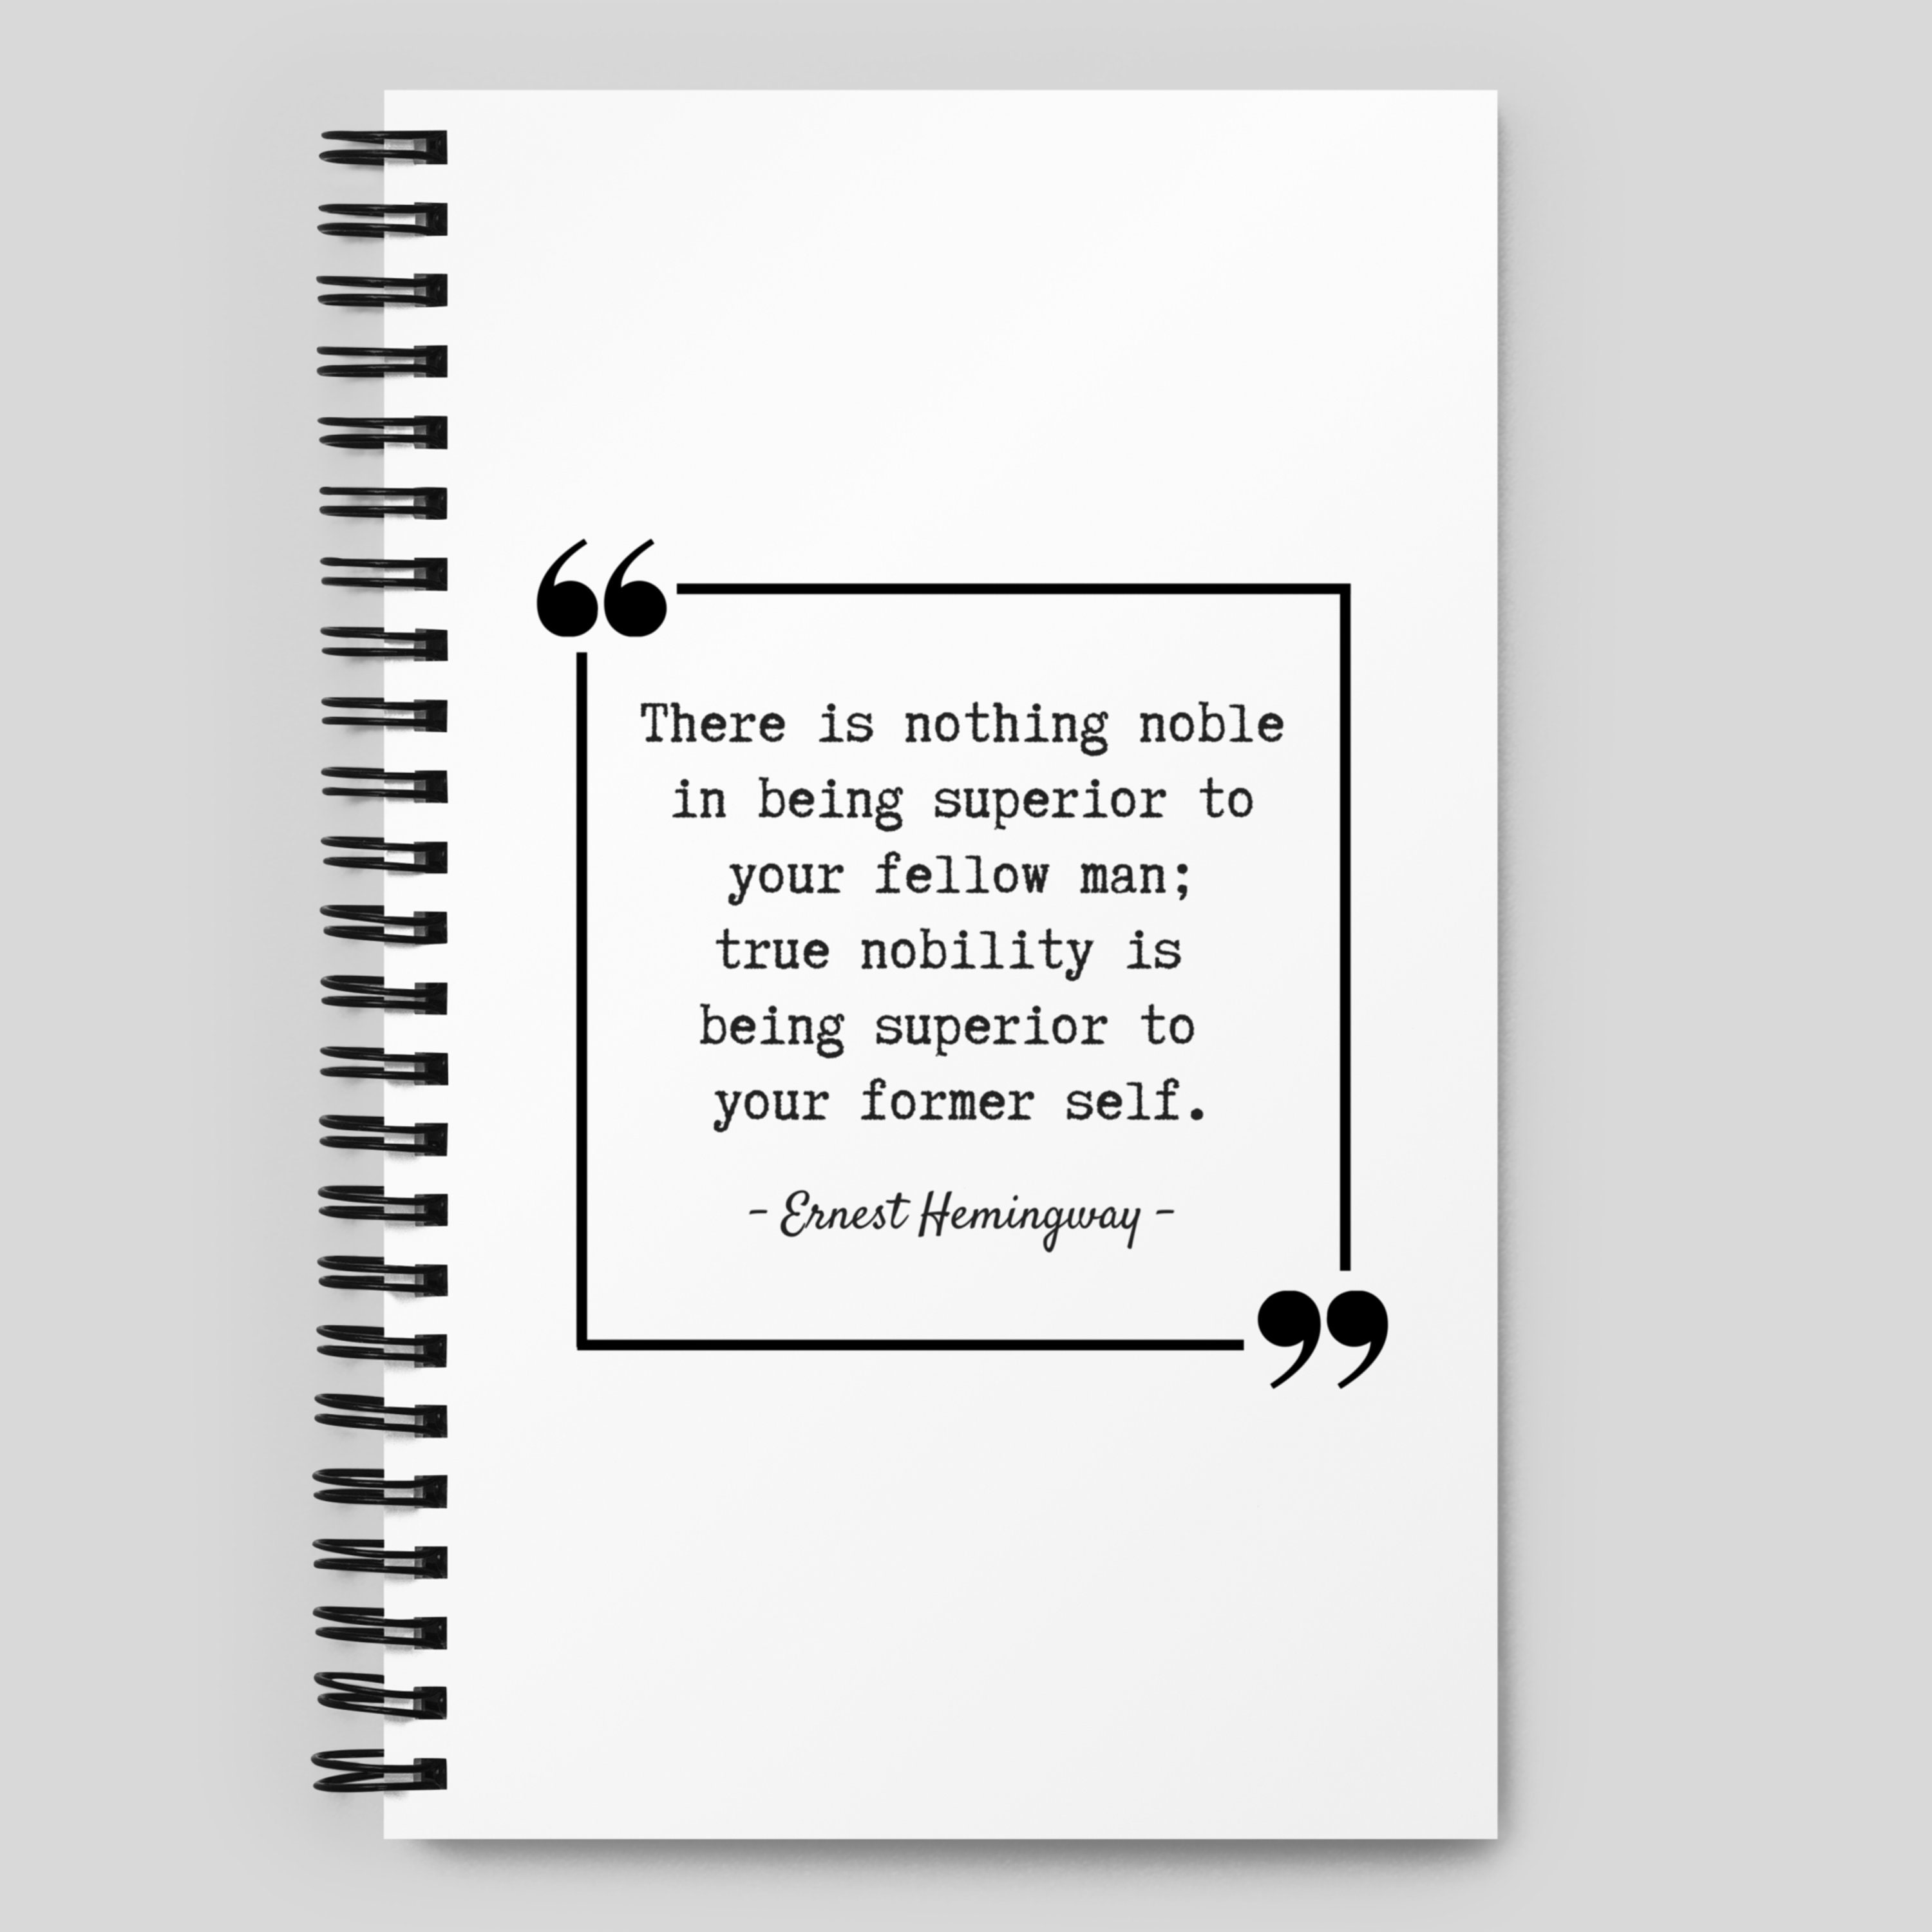 Ernest Hemingway Inspirational Quote 80 page Unlined Notebook